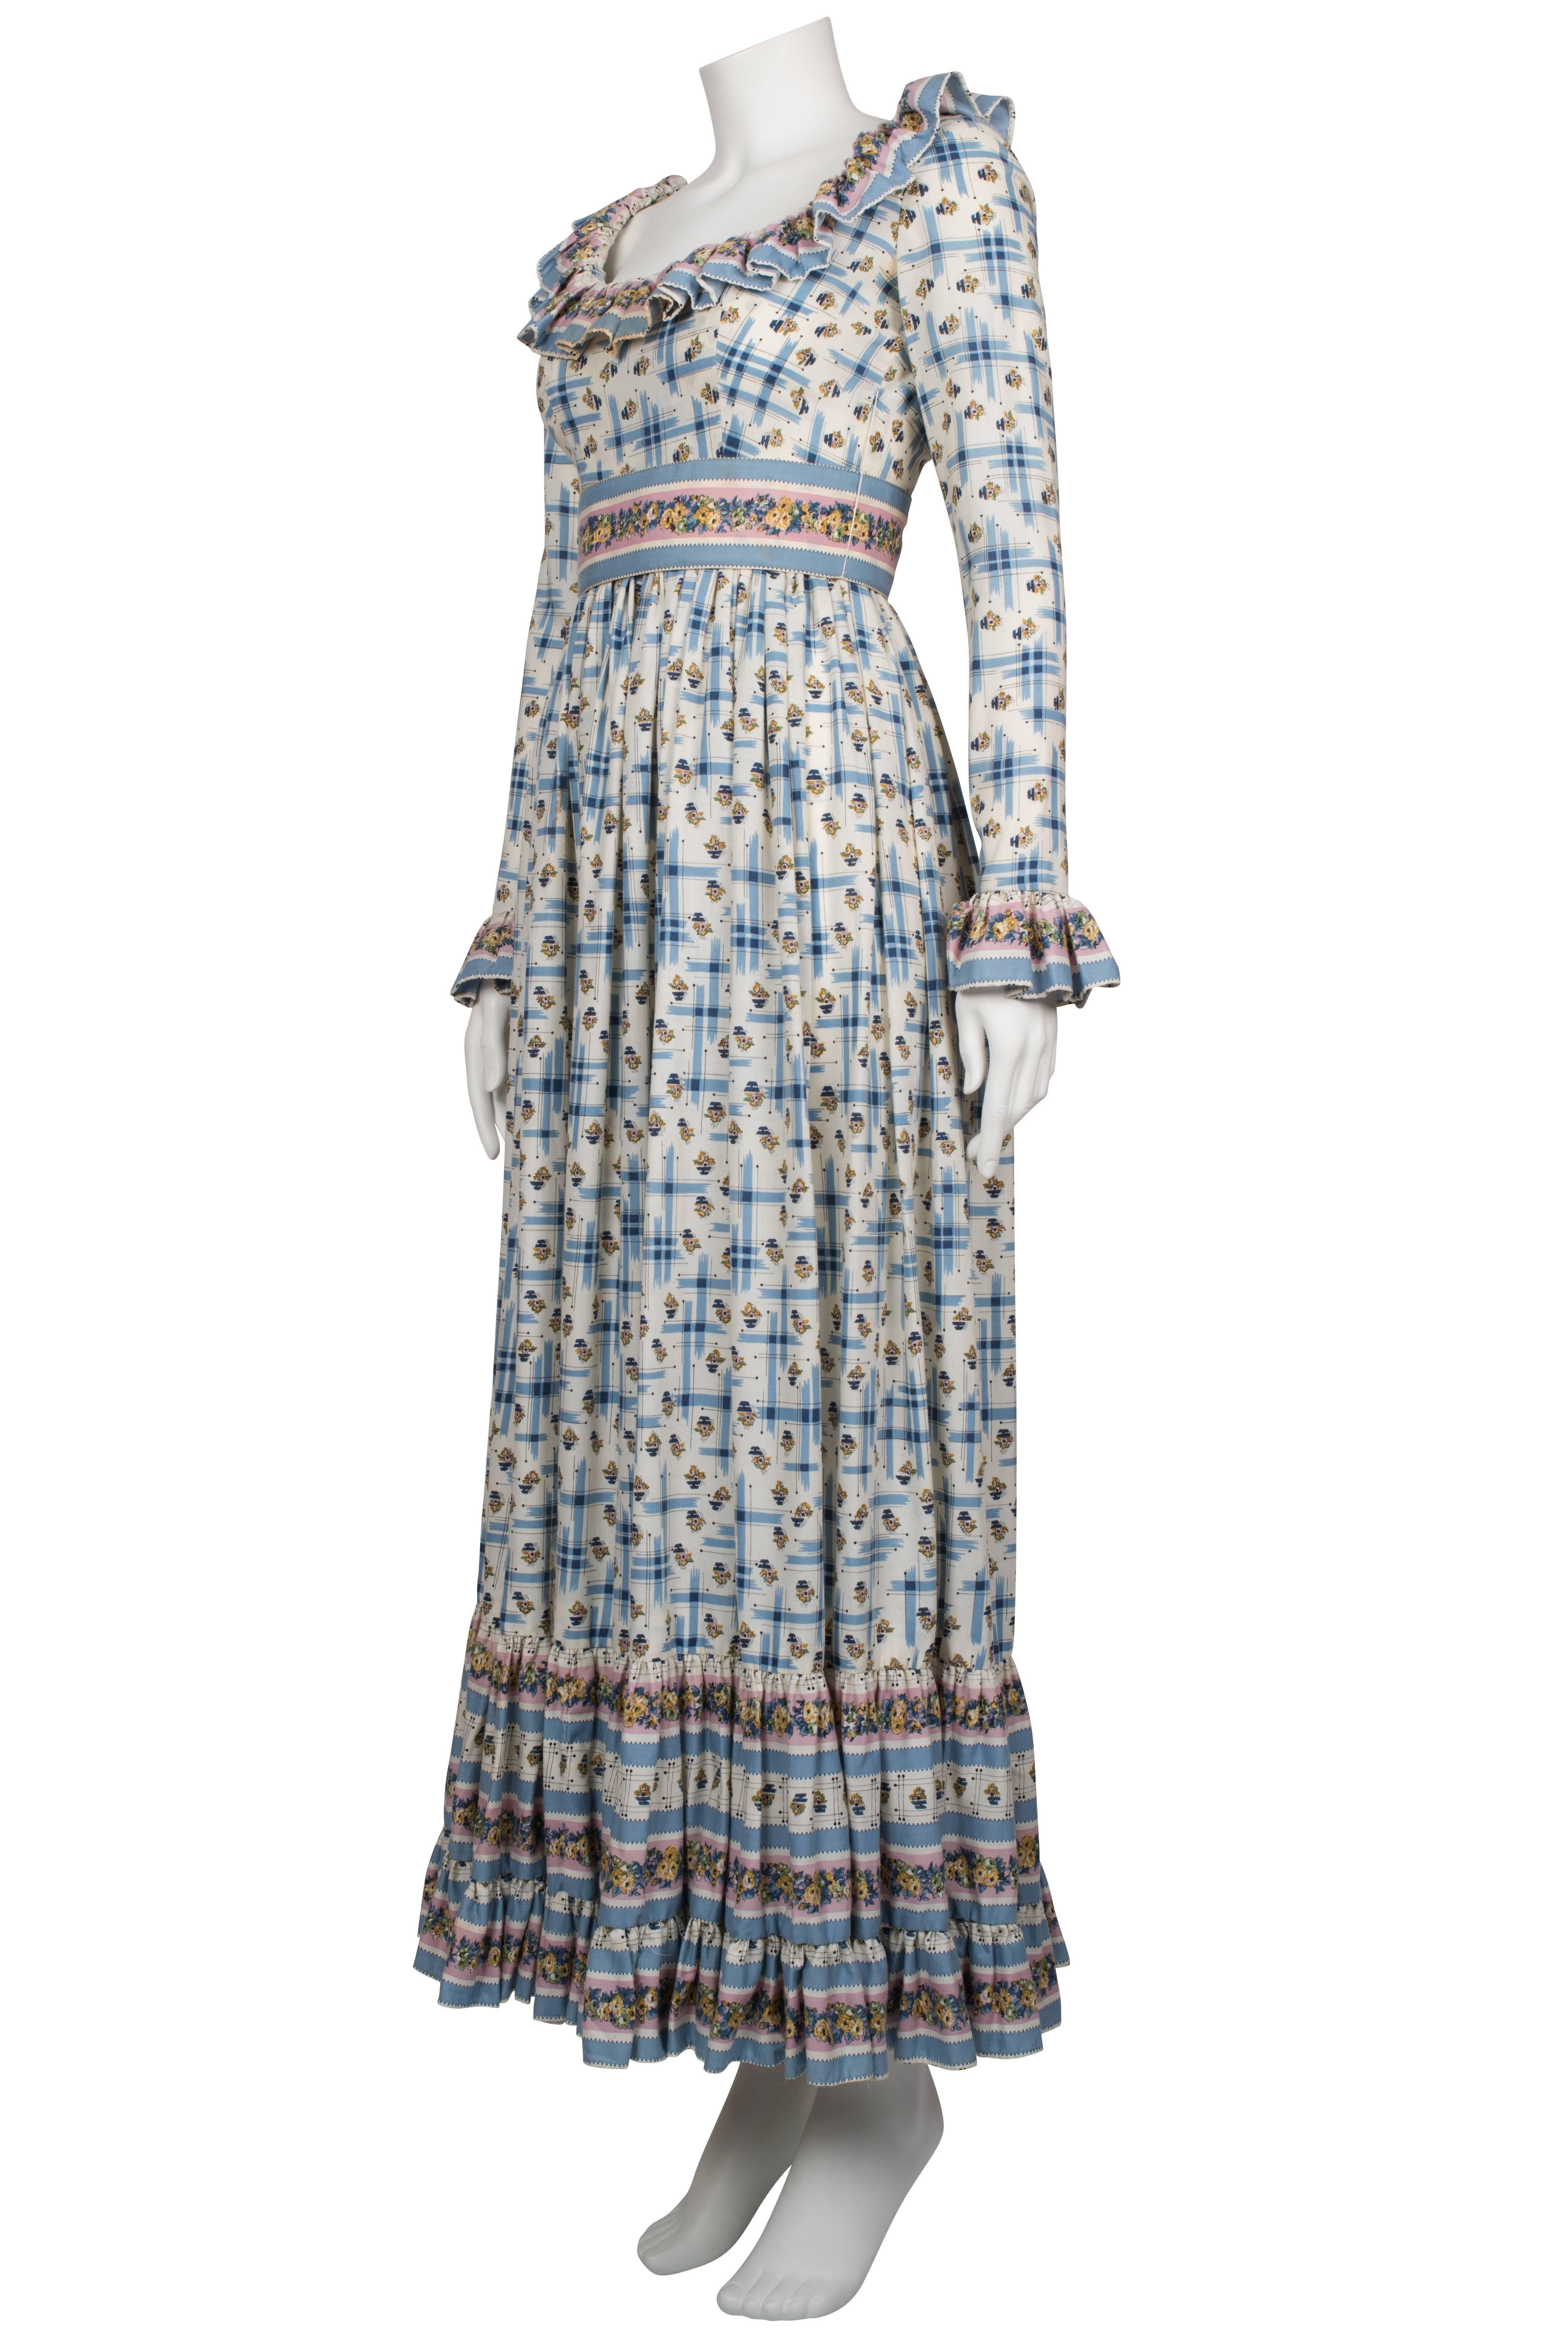 Women's 1970's Victor Costa Prairie Style Cotton Dress  For Sale